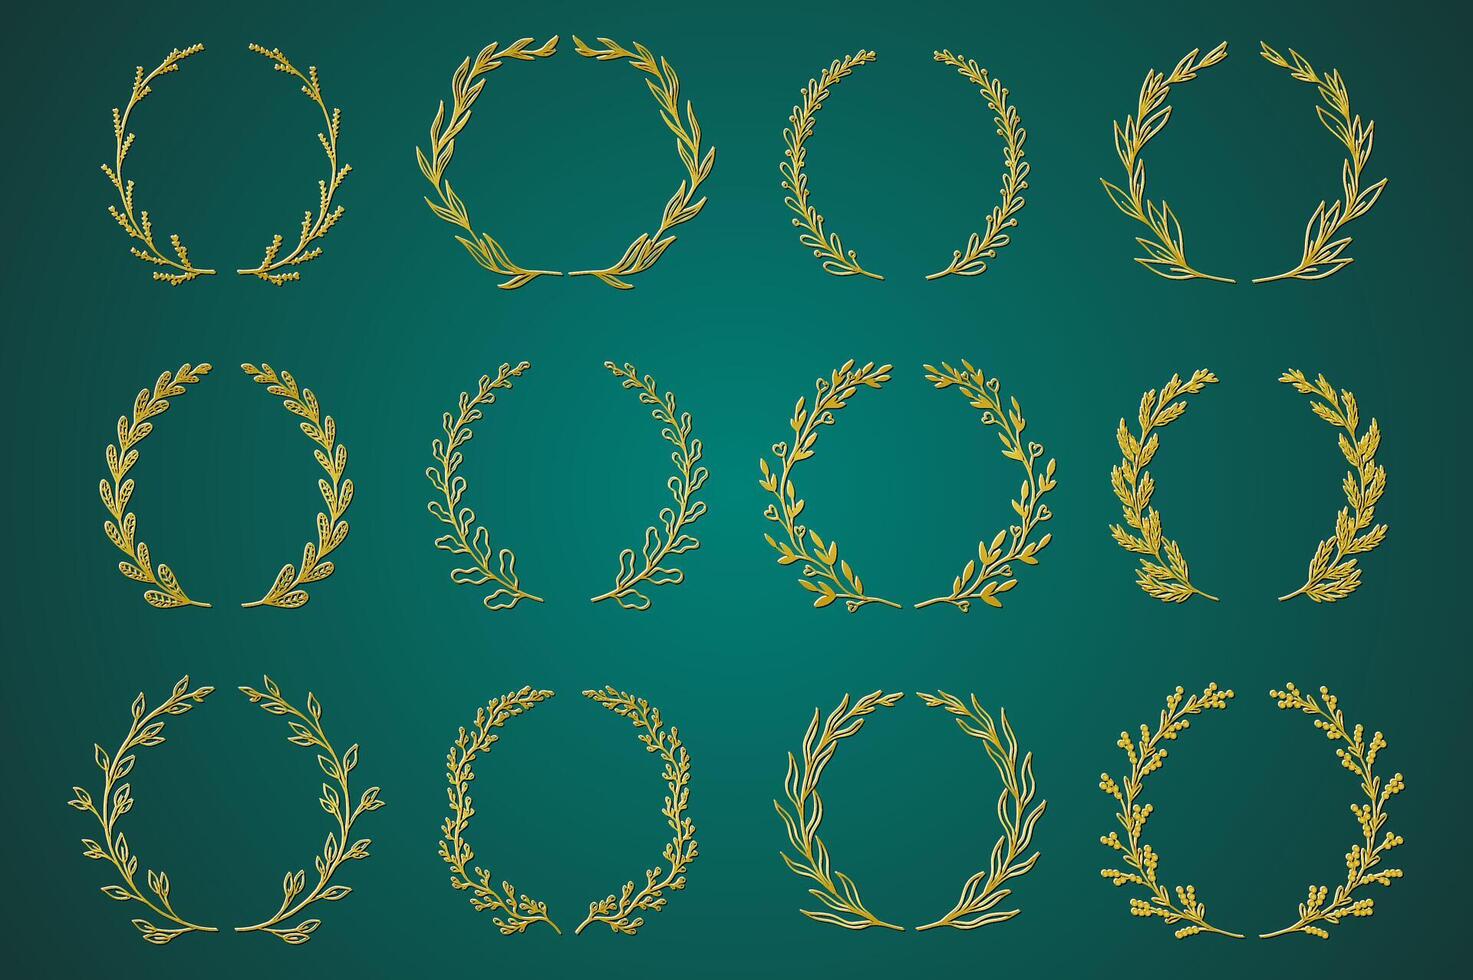 Gold ornamental branch wreathes set in hand drawn design. Laurel leaves wreath and decorative branch bundle. Collection of differen herbs, twigs, flowers and plants curl elements. decoration. vector